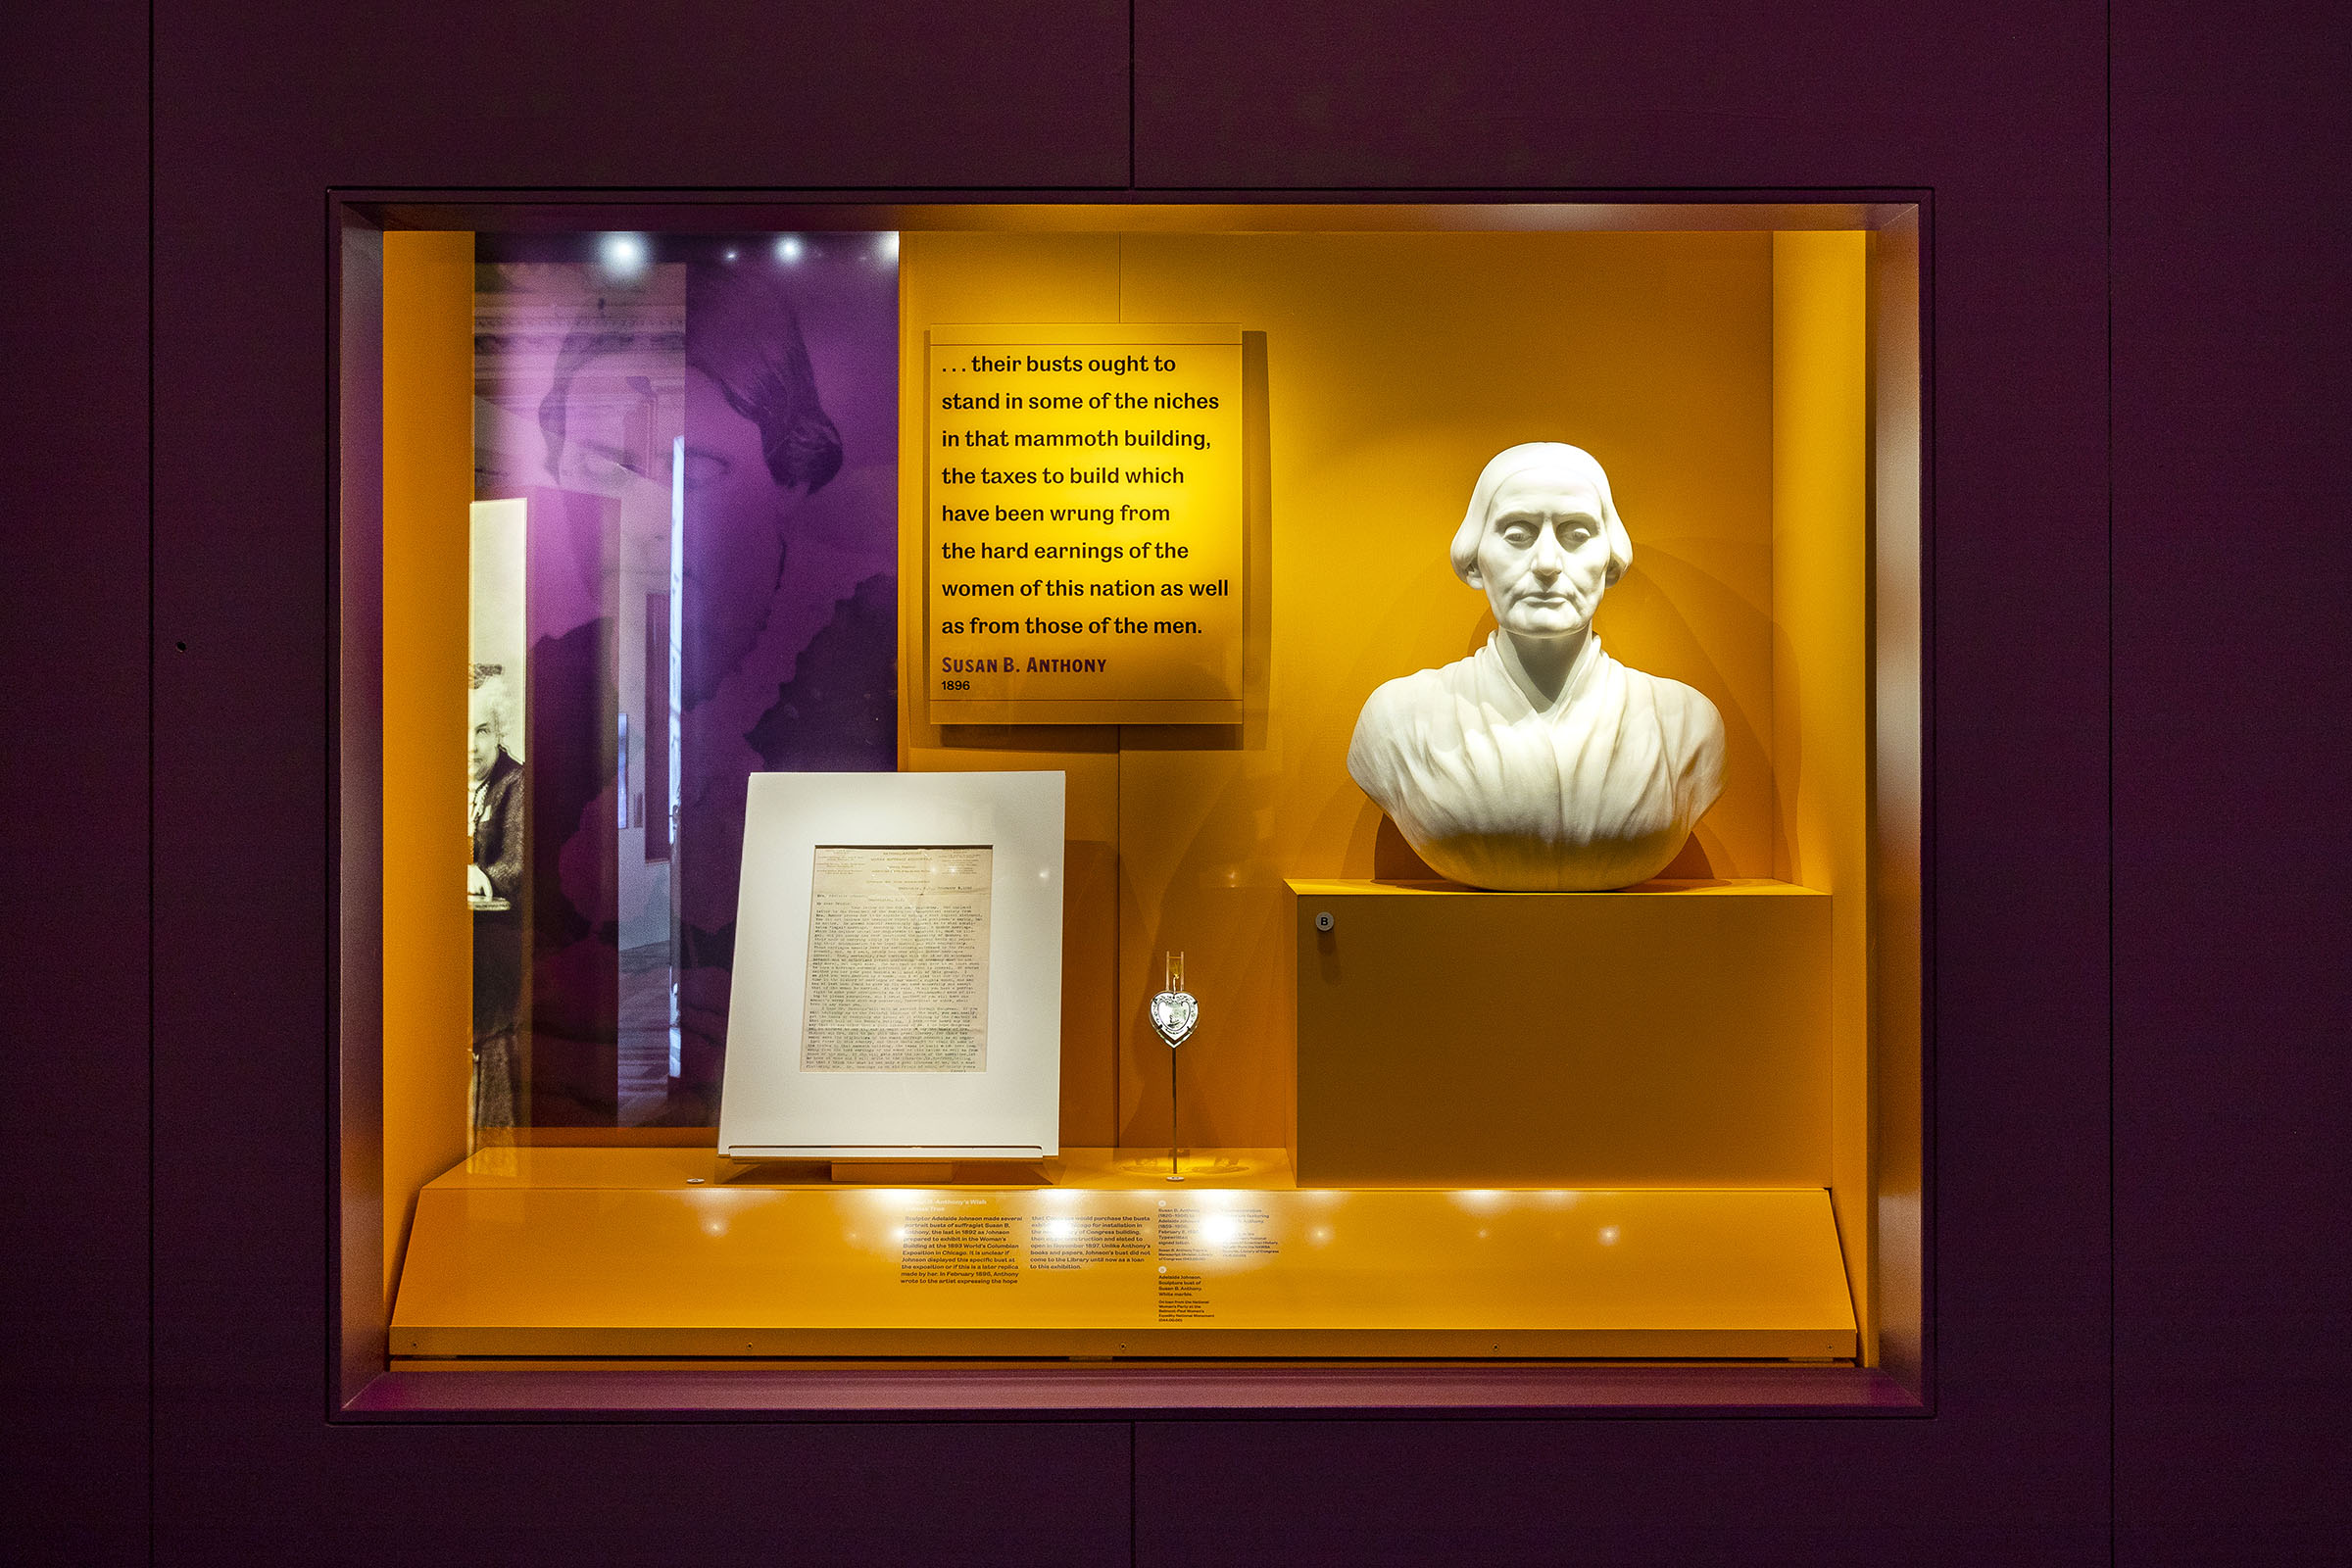 Shall Not Be Denied Exhibition. P+A recommended a color palette that would both harmonize with the southwest curtain’s floor and walls and honor the American suffragists, who used the colors purple and yellow.